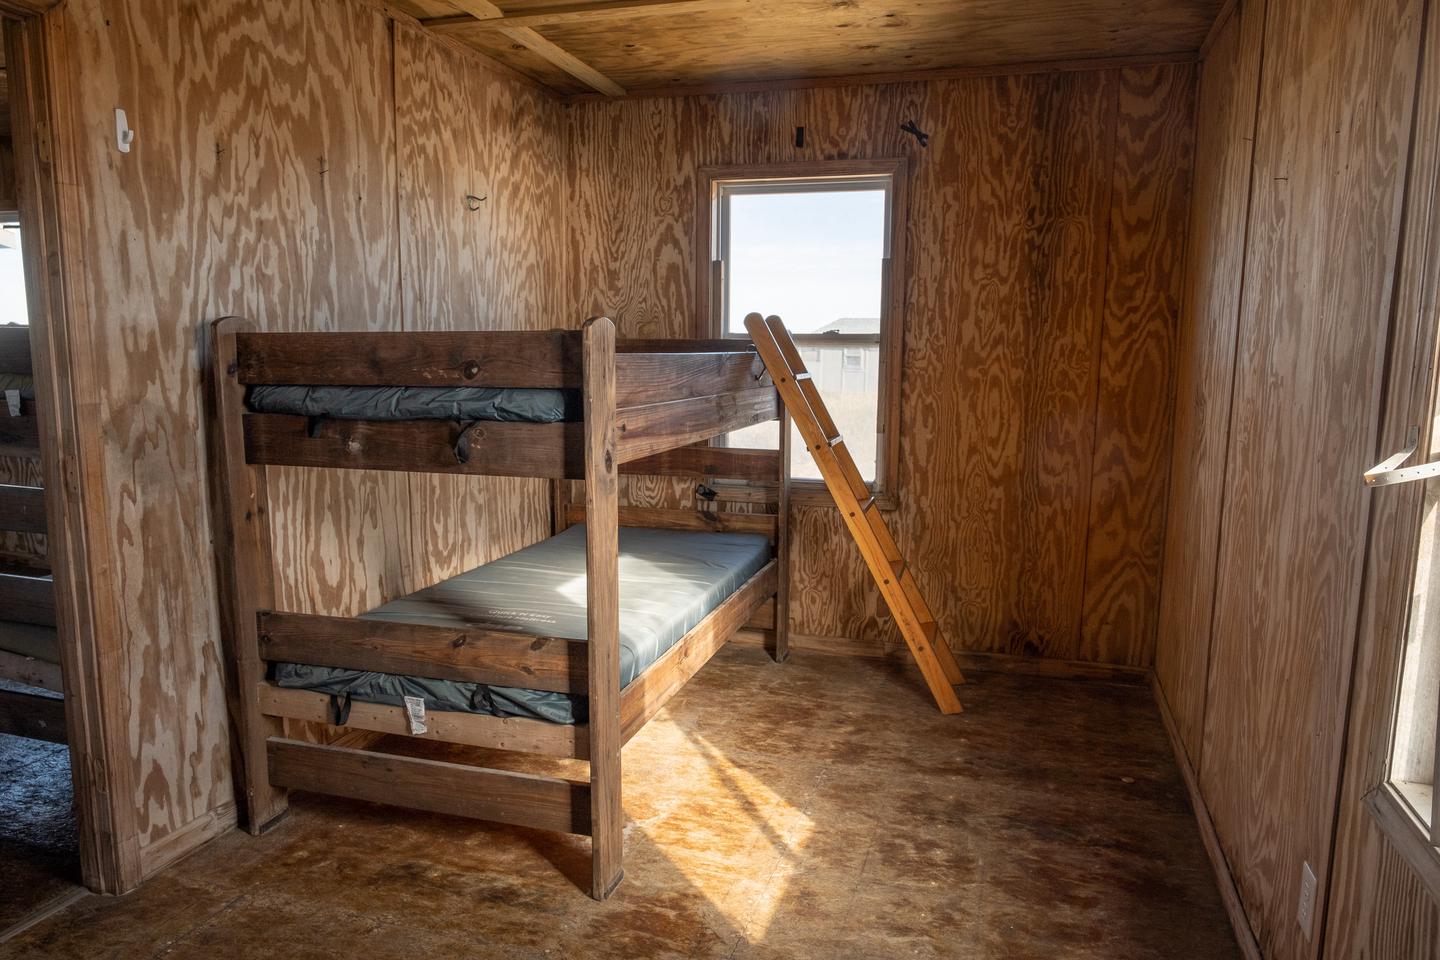 A view of the bedroom, with one bunk bed along the wallBedroom area.